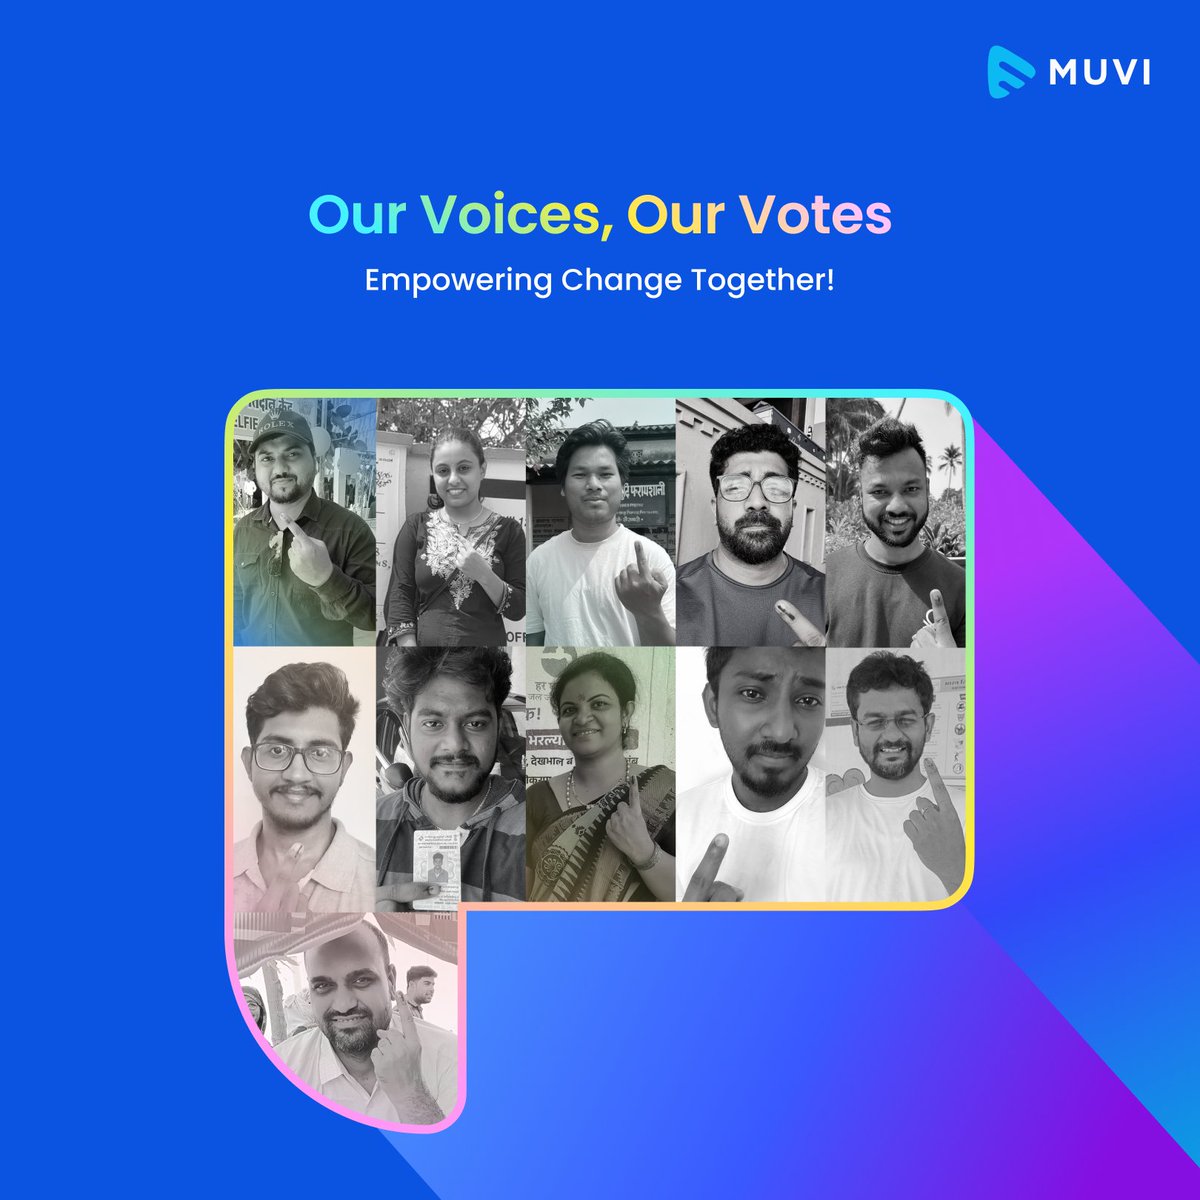 Proud to see our Muvi.com family exercising their democratic rights! 🗳️ Here's to our team members who took the time to cast their votes and make their voices heard. #votingmatters #LifeatMuvi #votingday #VotingRights #VotingRightsAct #workculture #officeculture